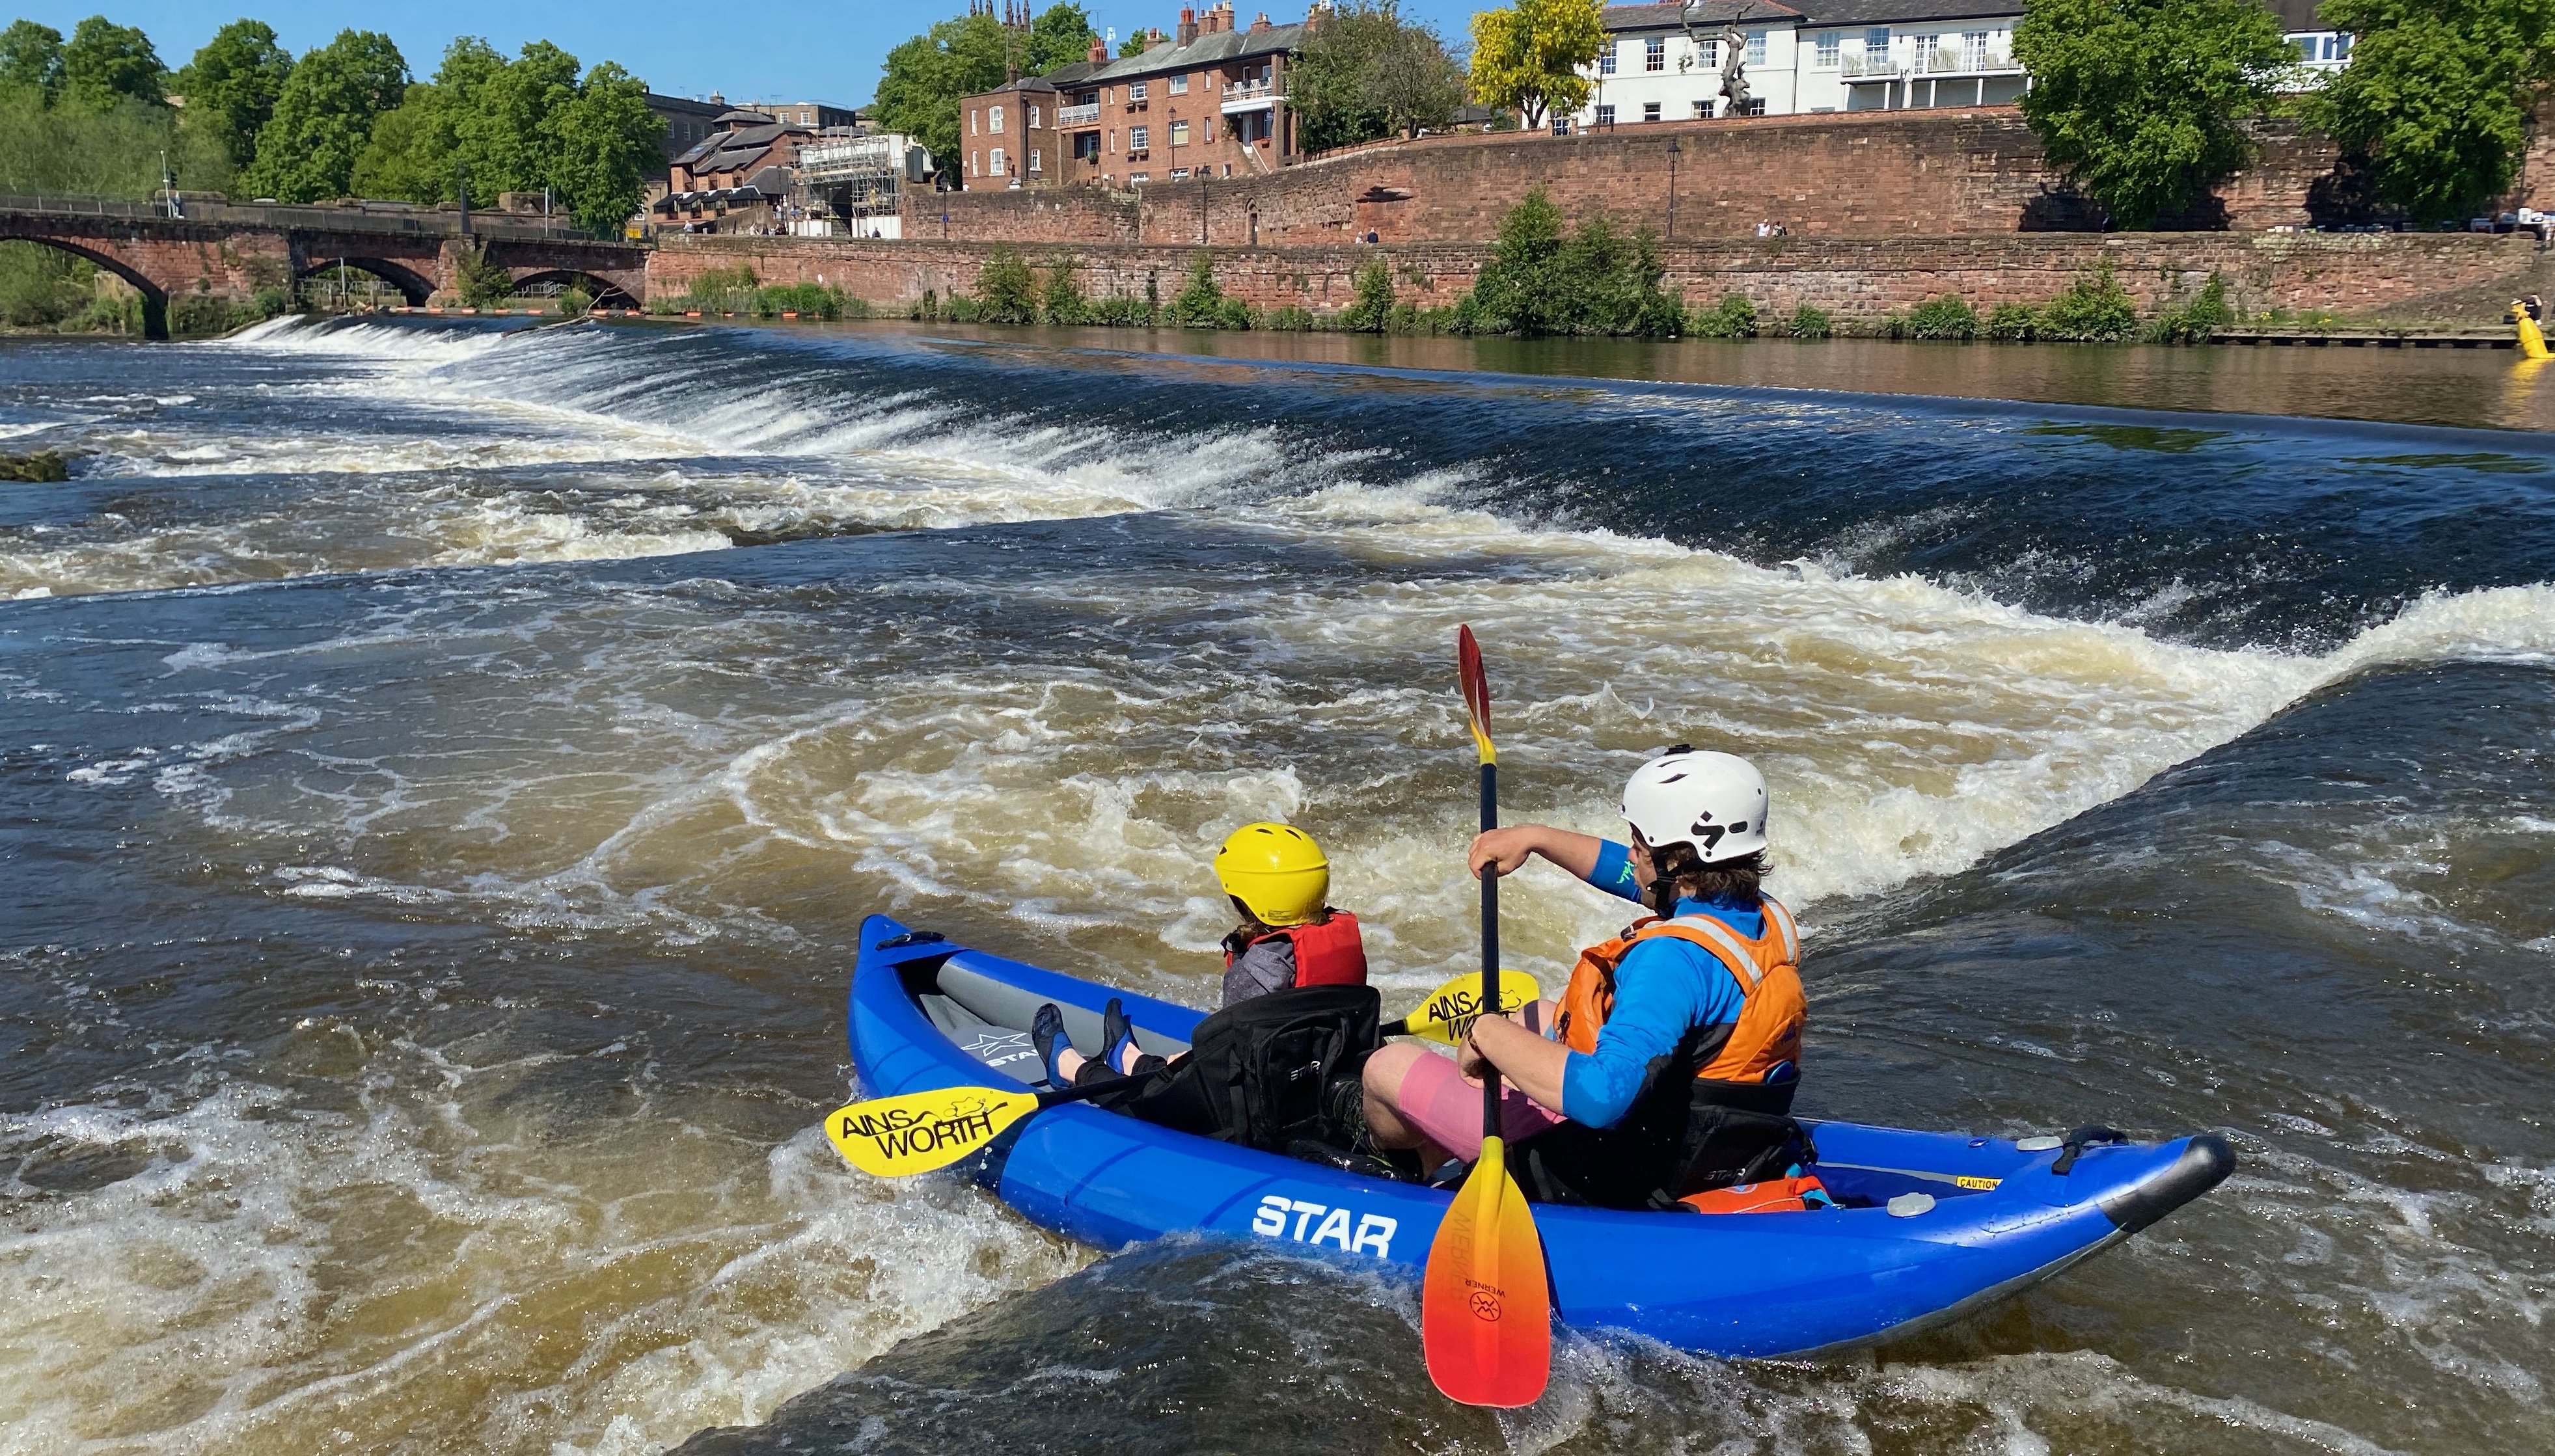 Kayakers navigating rapids in Chester